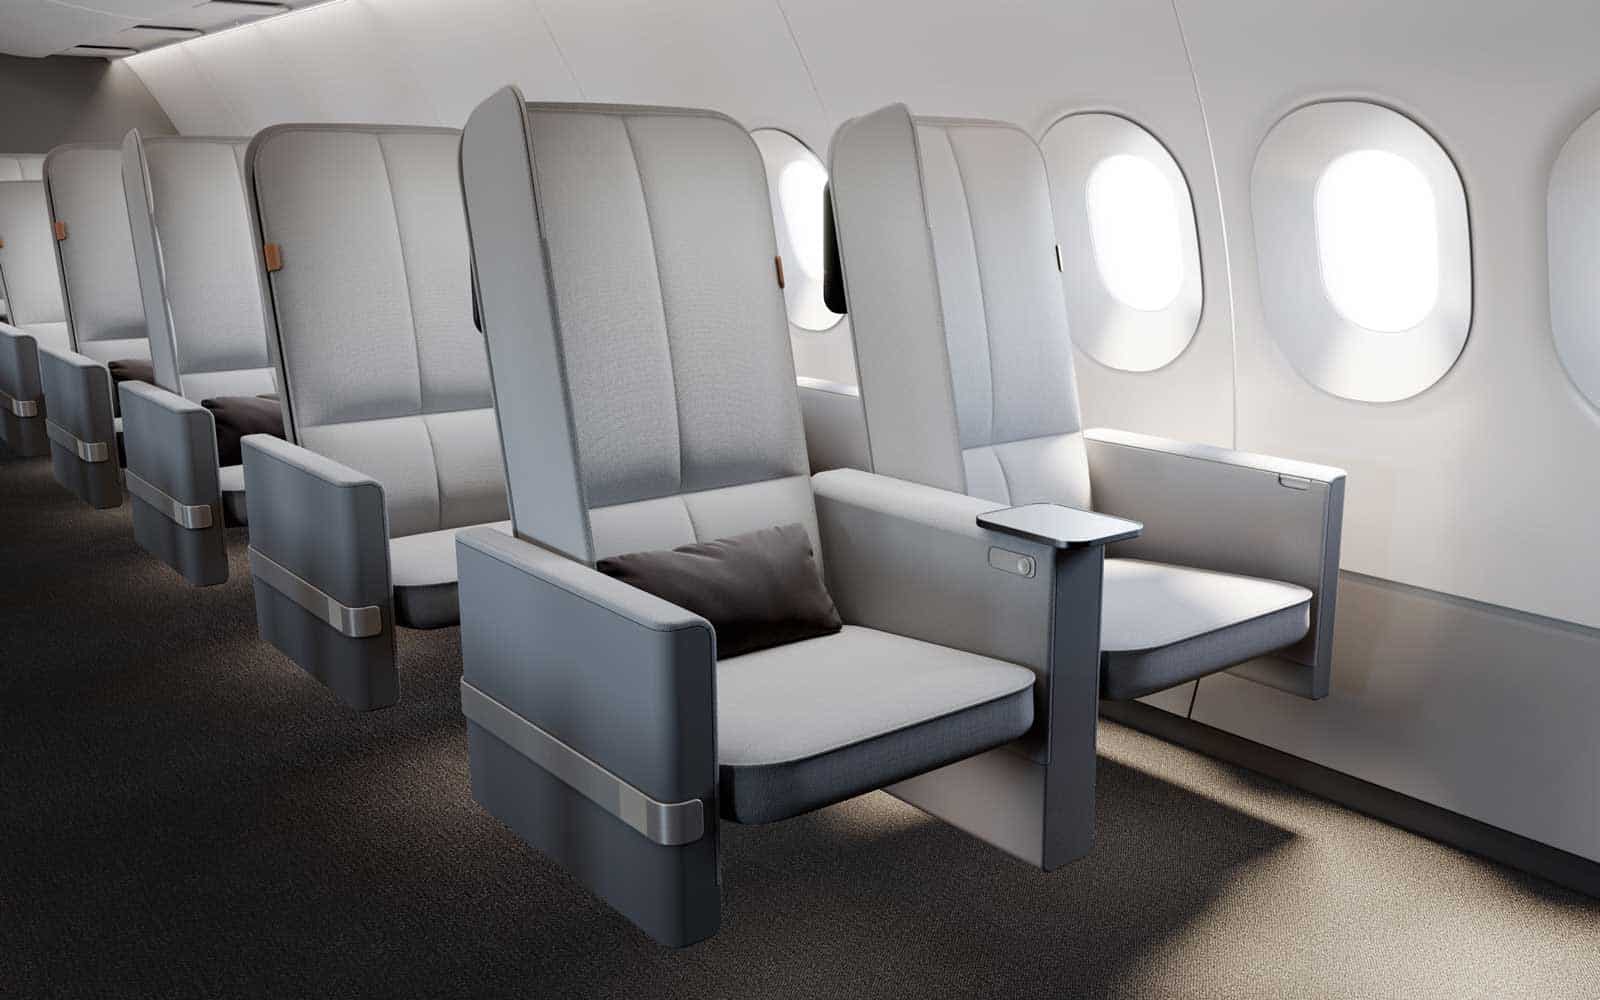 This New Seat Design May Make Flying Less Painful